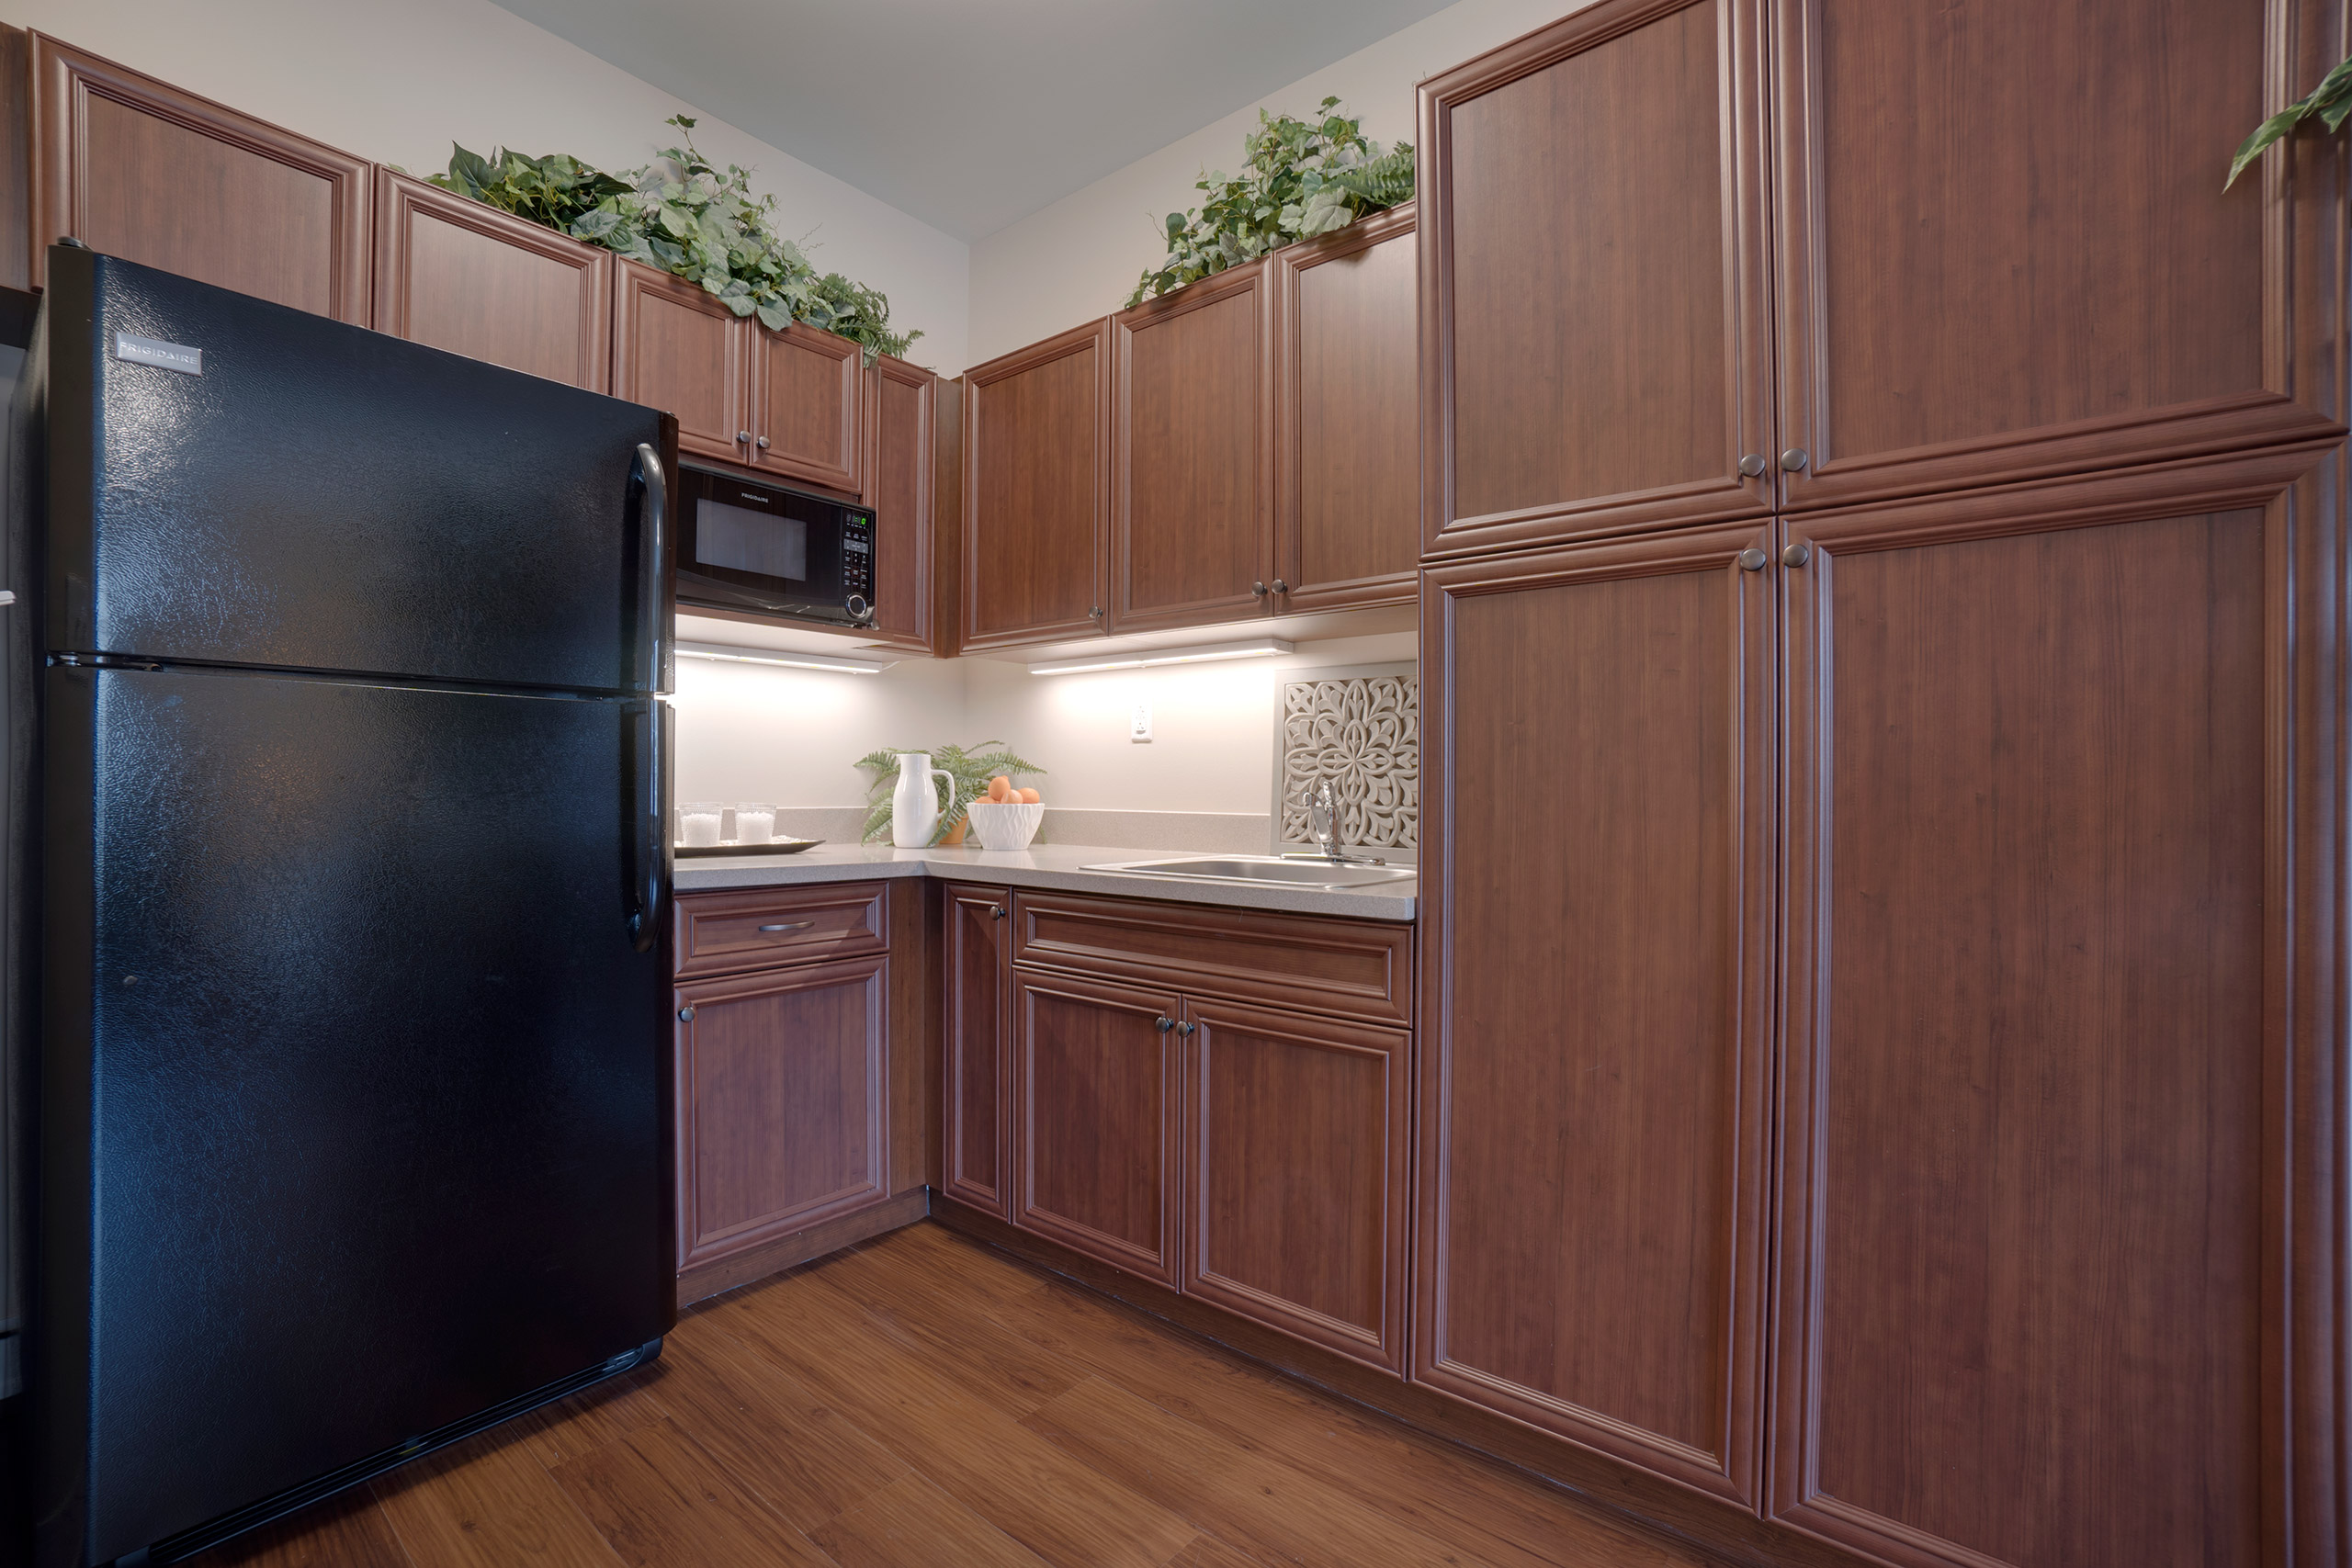 Some apartments in Assisted Living offer fully appointed kitchens